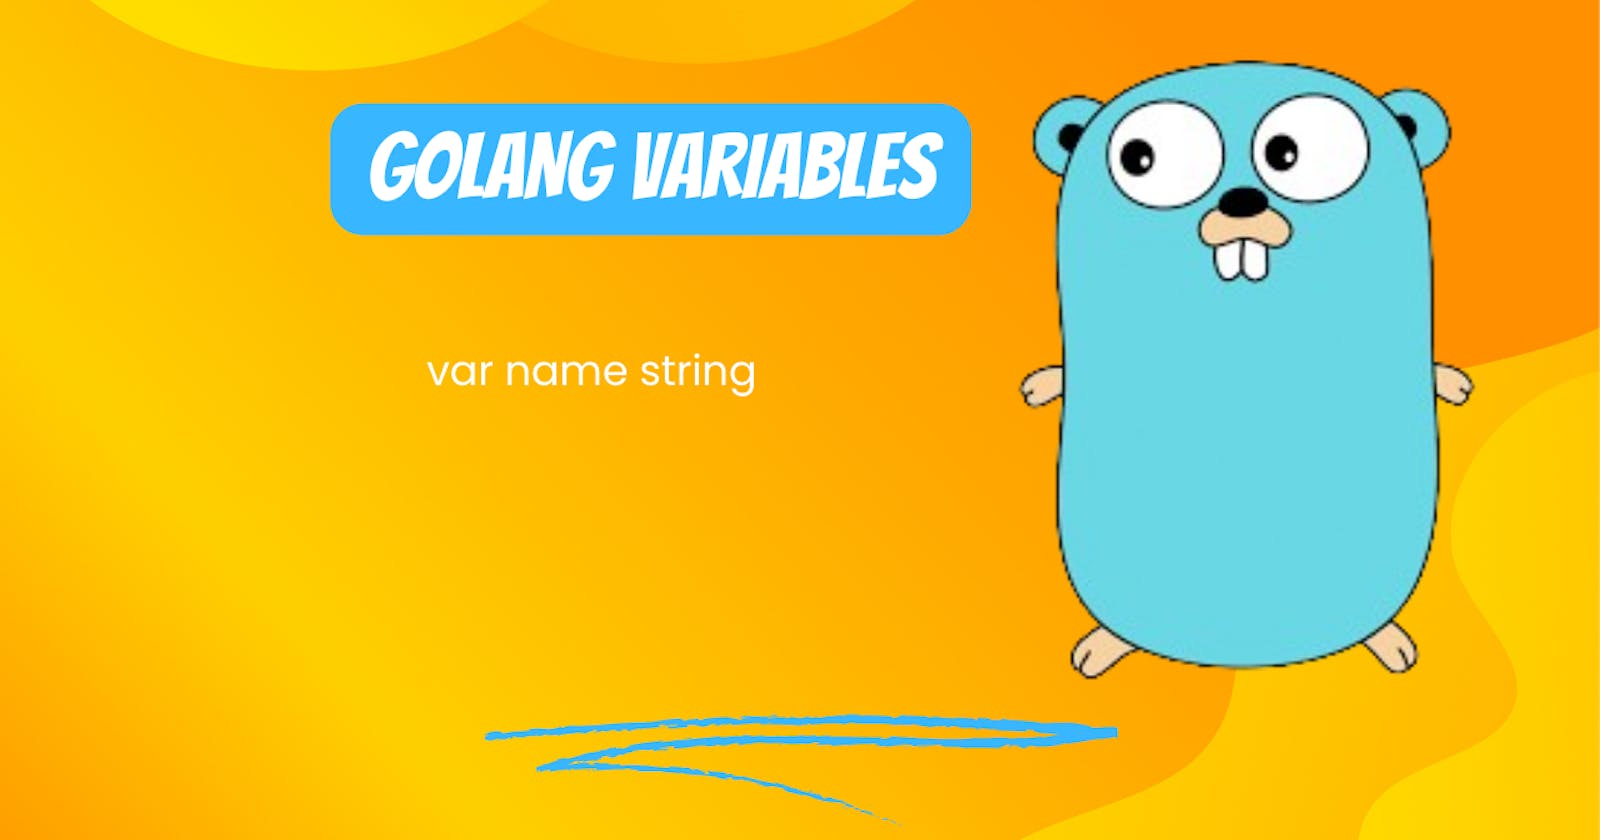 Golang variables for beginners